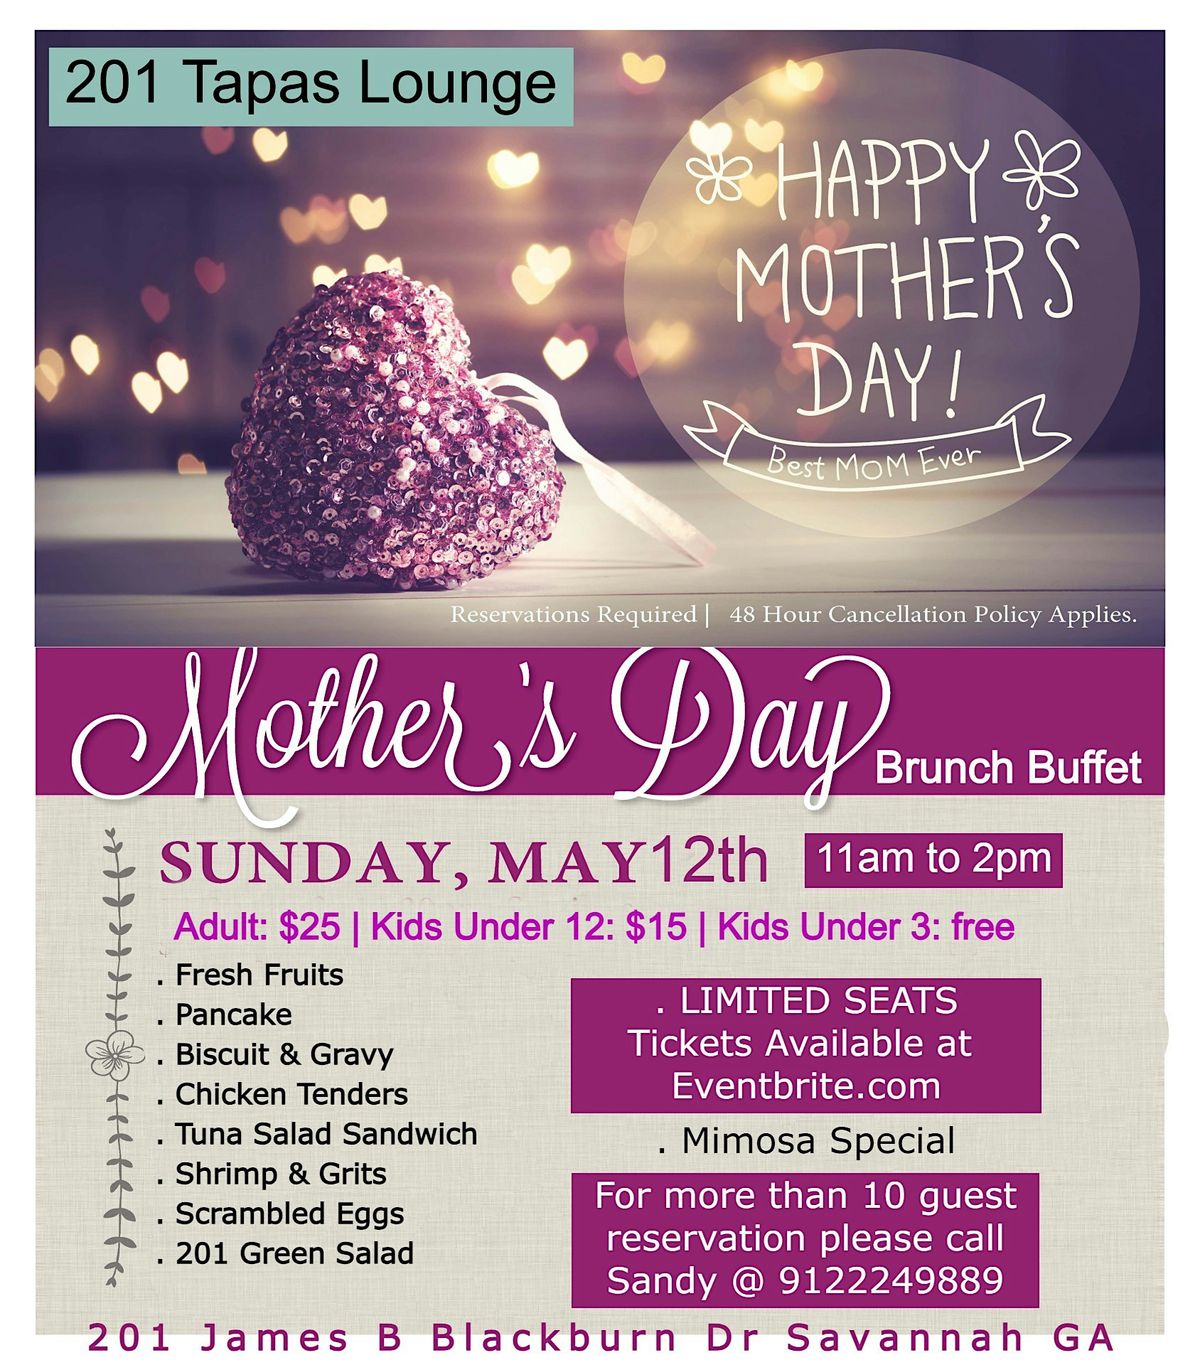 Mothers Day Brunch Buffet At 201 Tapas